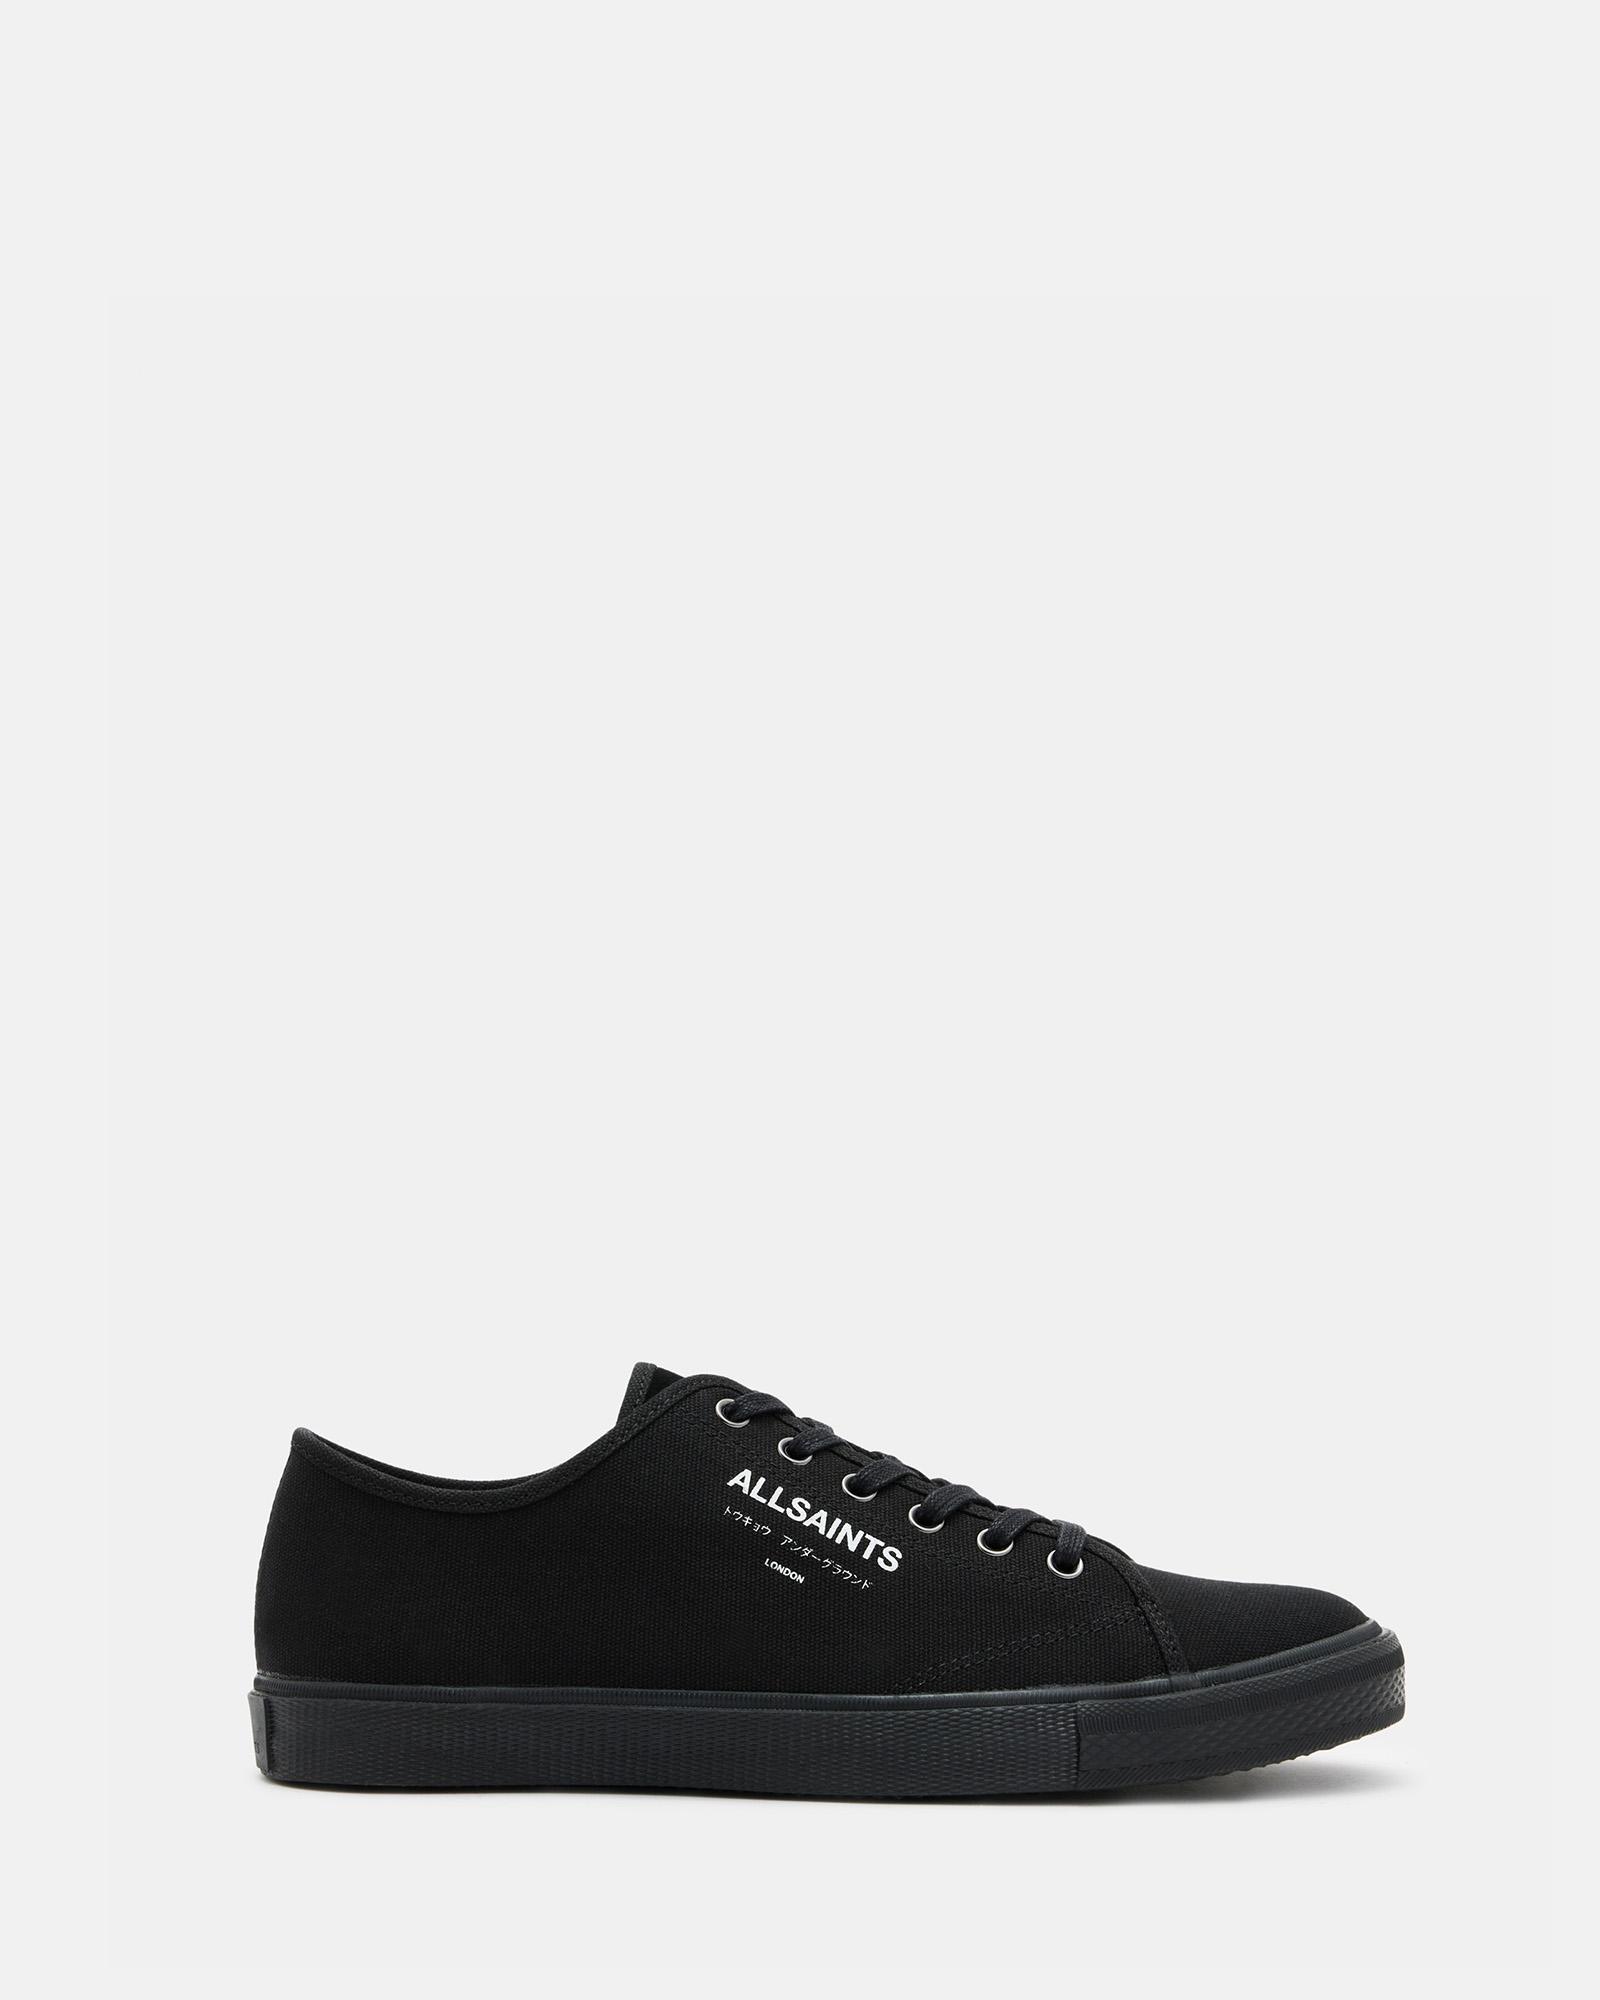 Allsaints Underground Canvas Low Top Trainers In Black